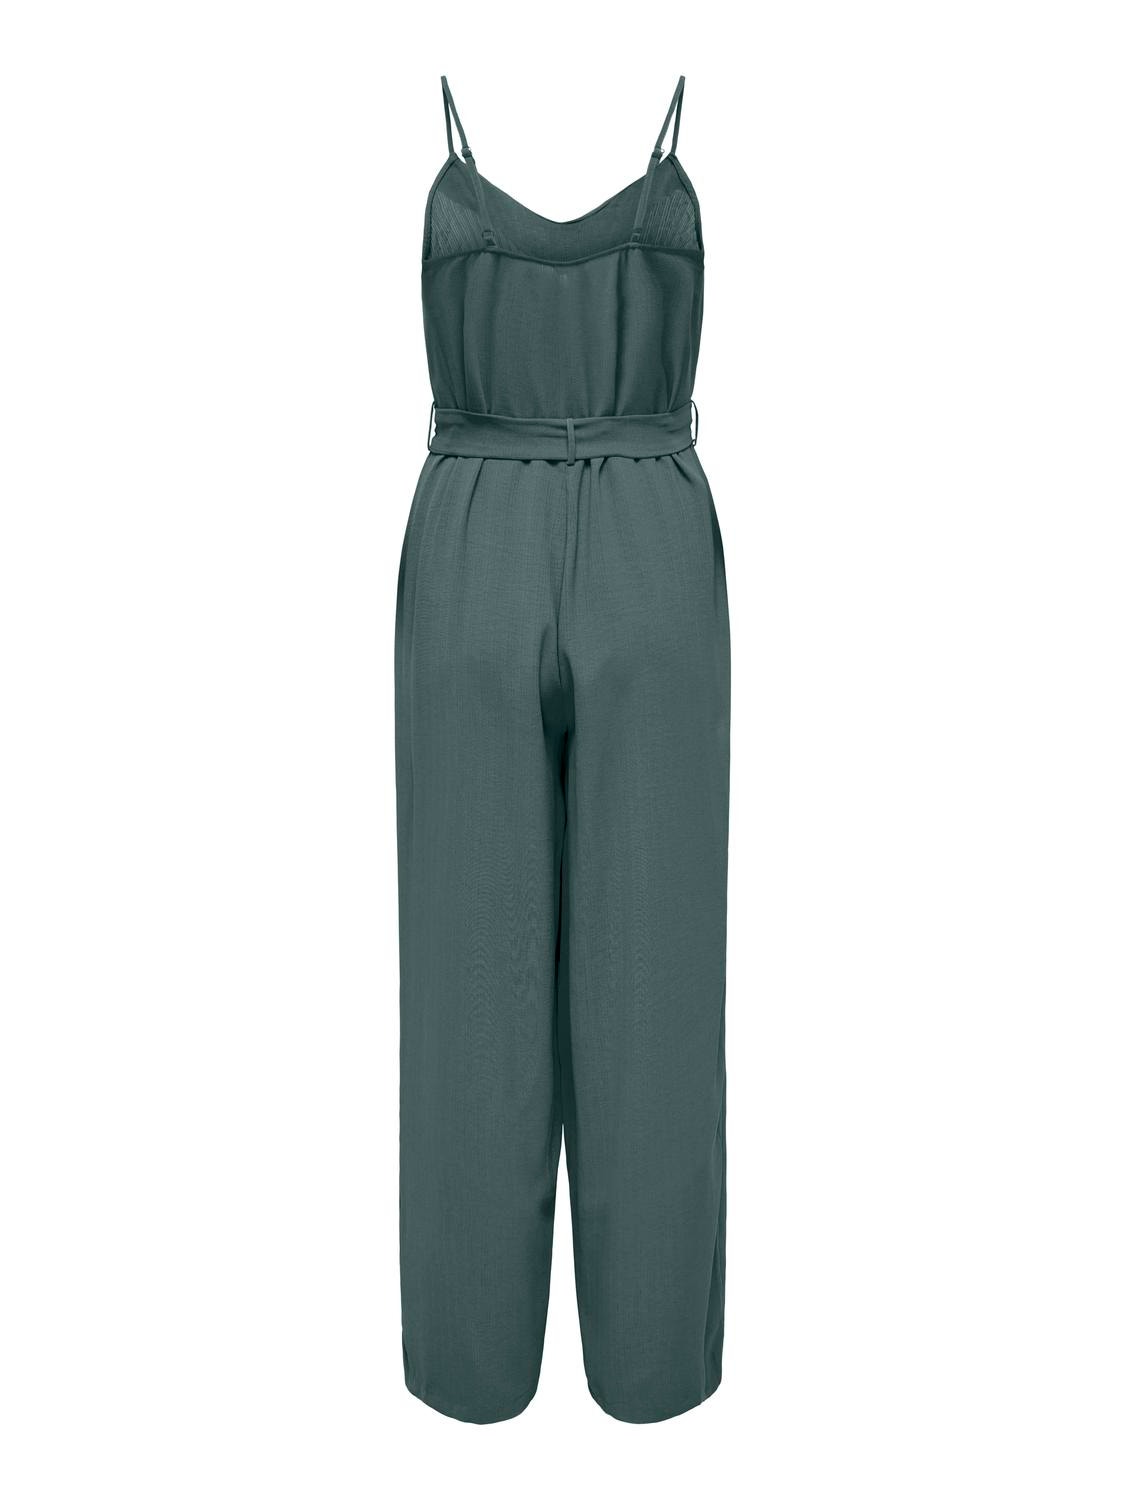 ONLY Thin straps Jumpsuit -Balsam Green - 15325078